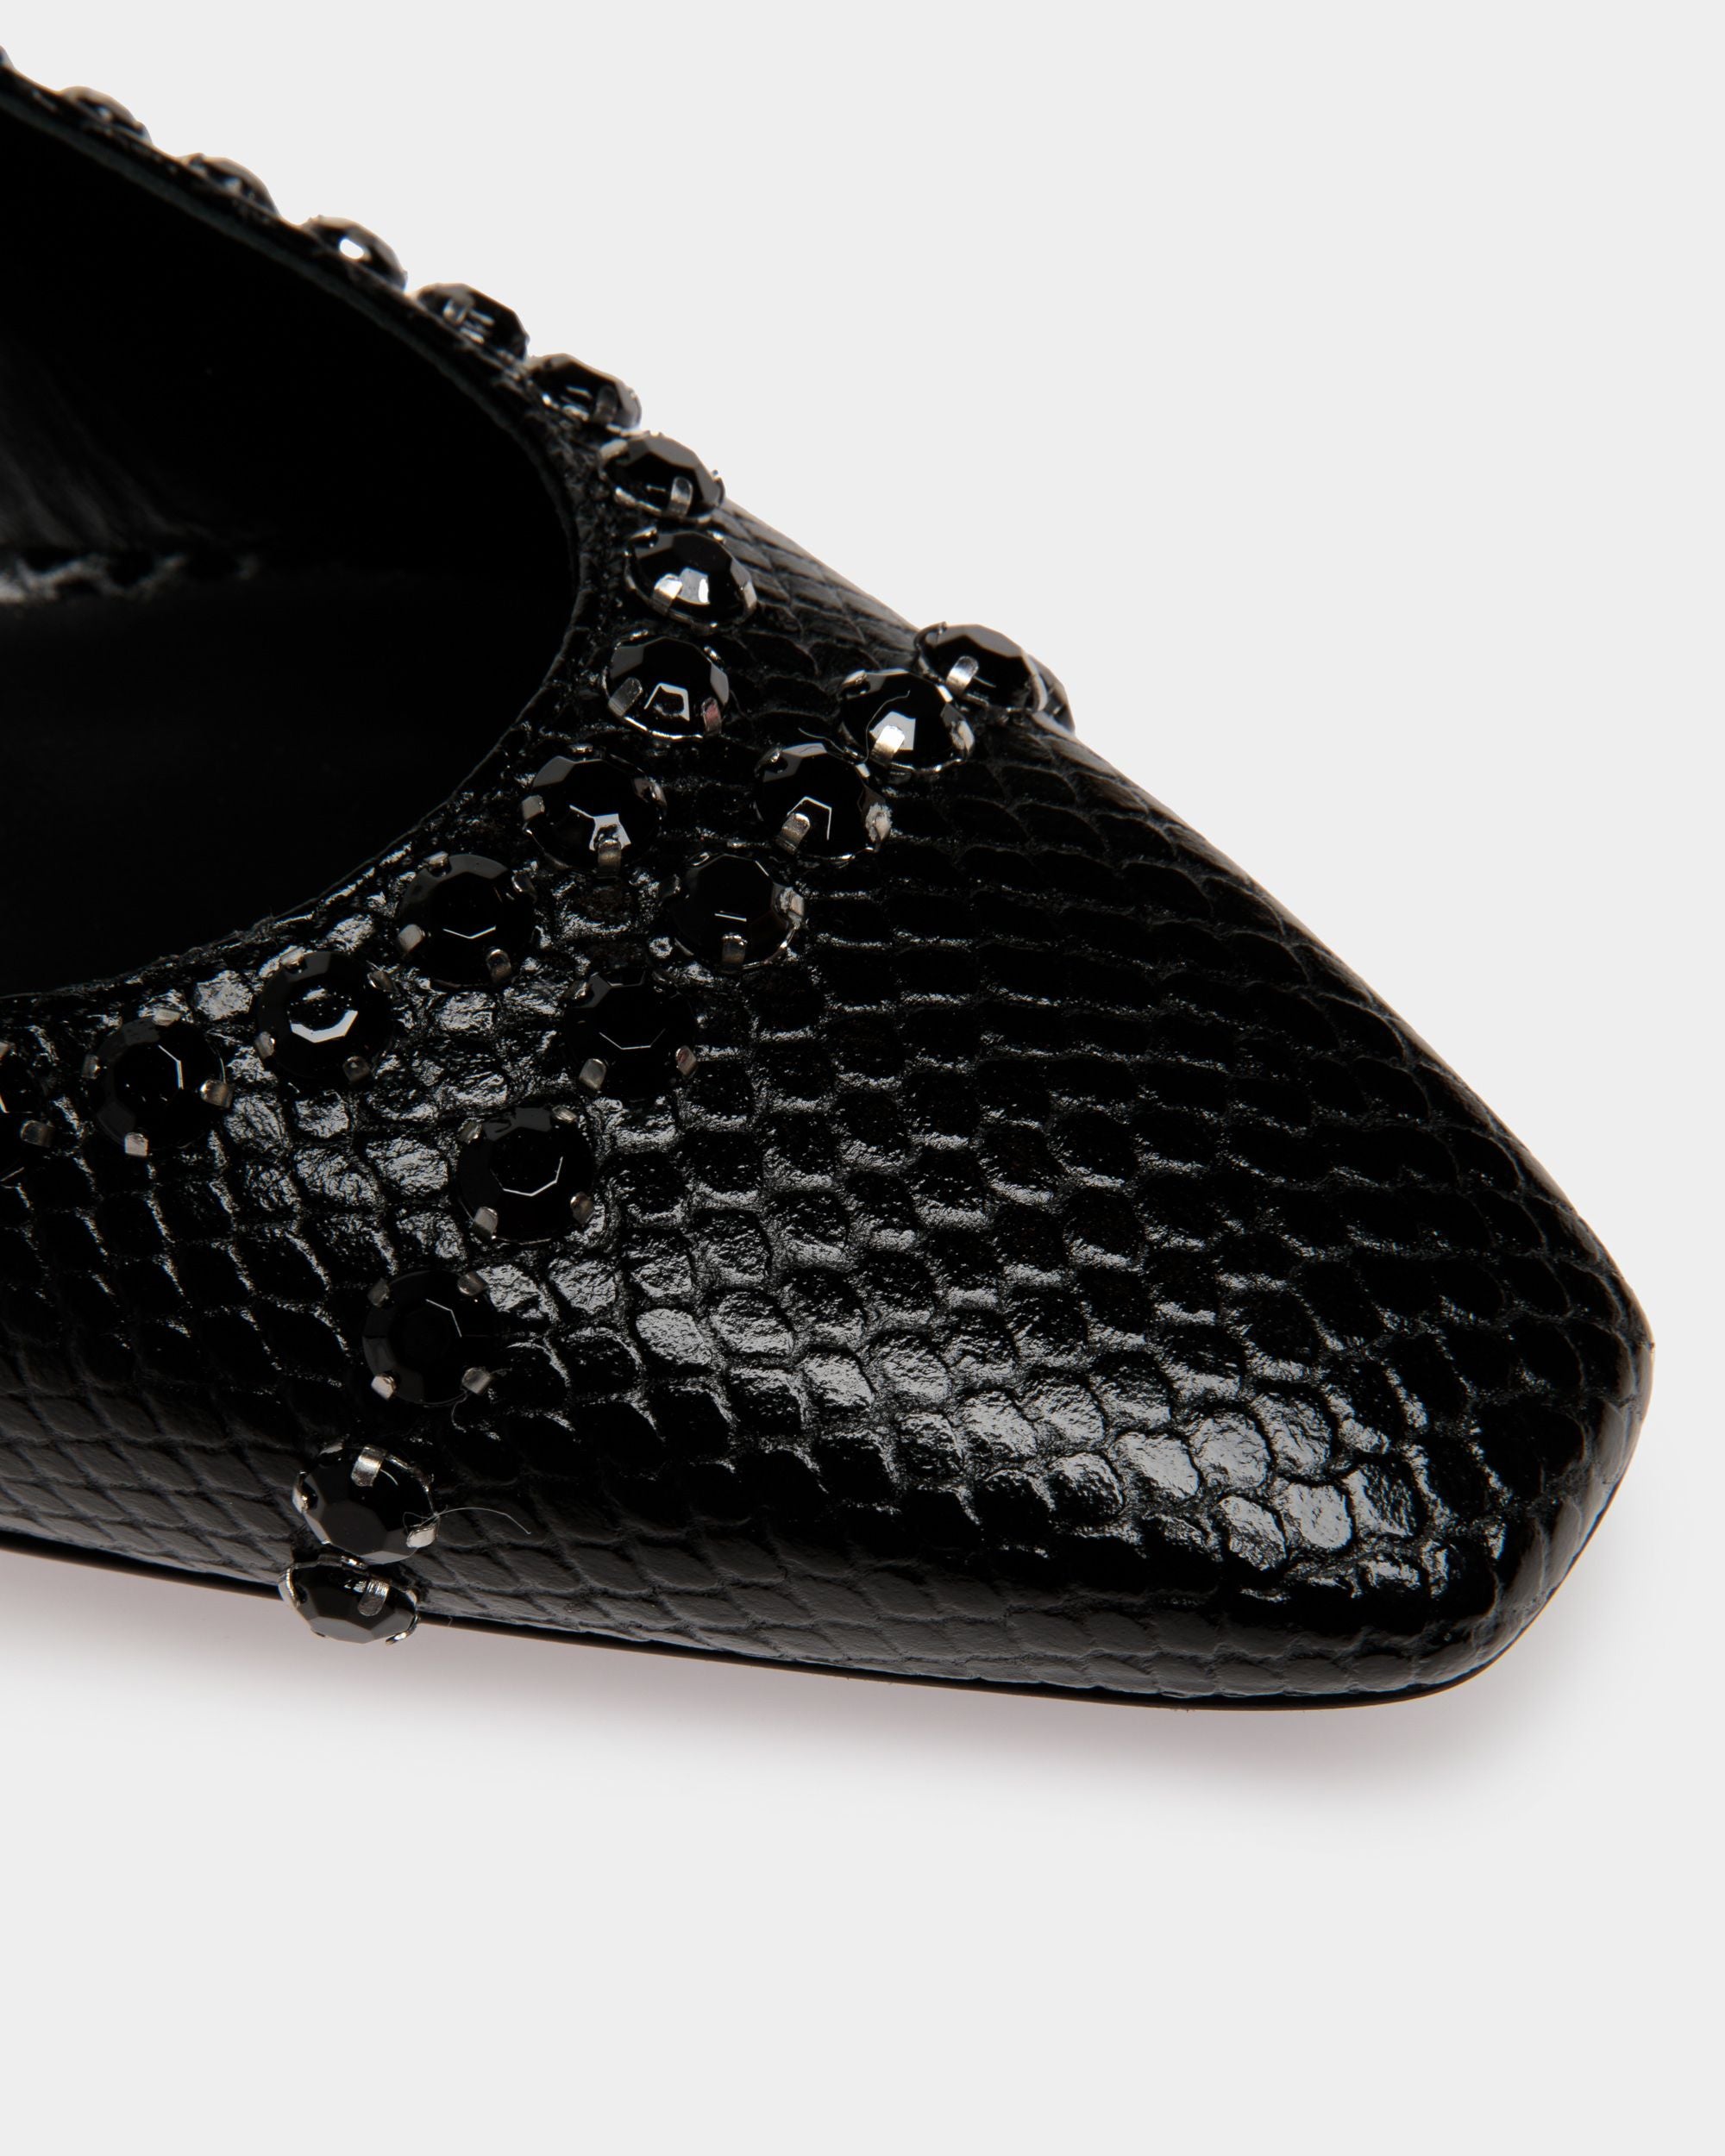 Sylt | Women's Slingback Pump in Black Python Printed Leather | Bally | Still Life Detail